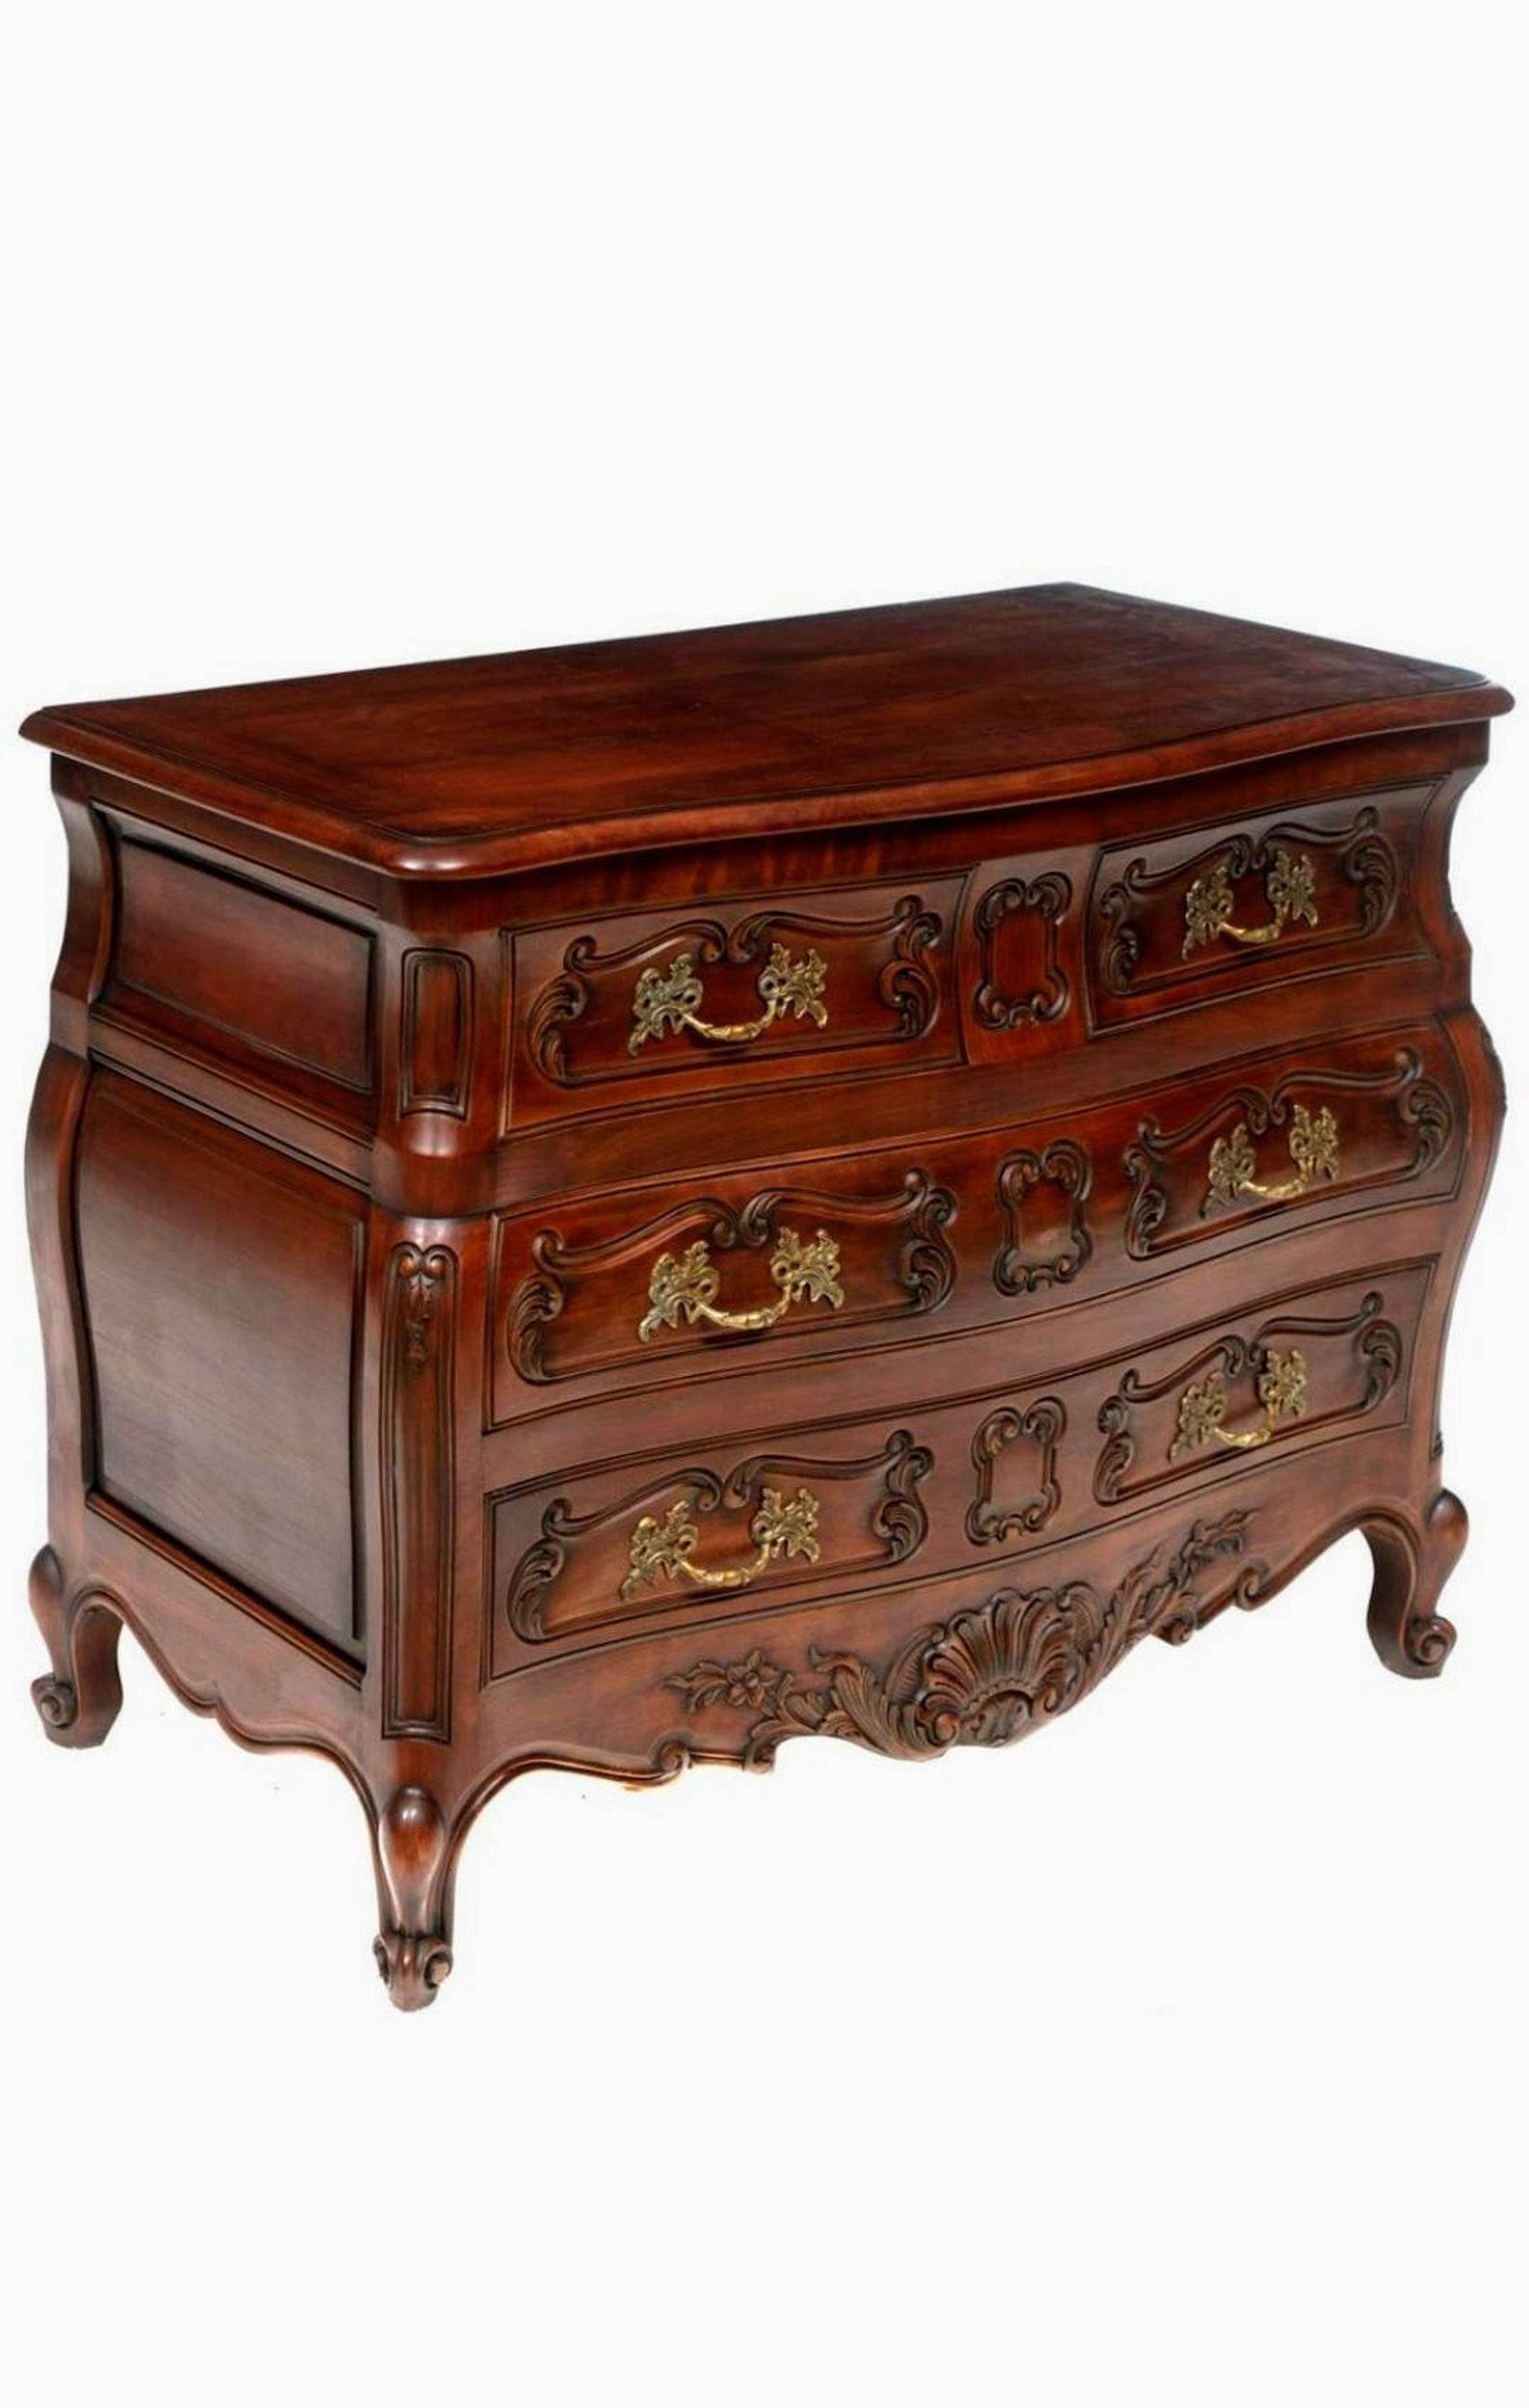 19th Century Antique French Provincial Louis XV Style Bombe Chest of Drawers For Sale